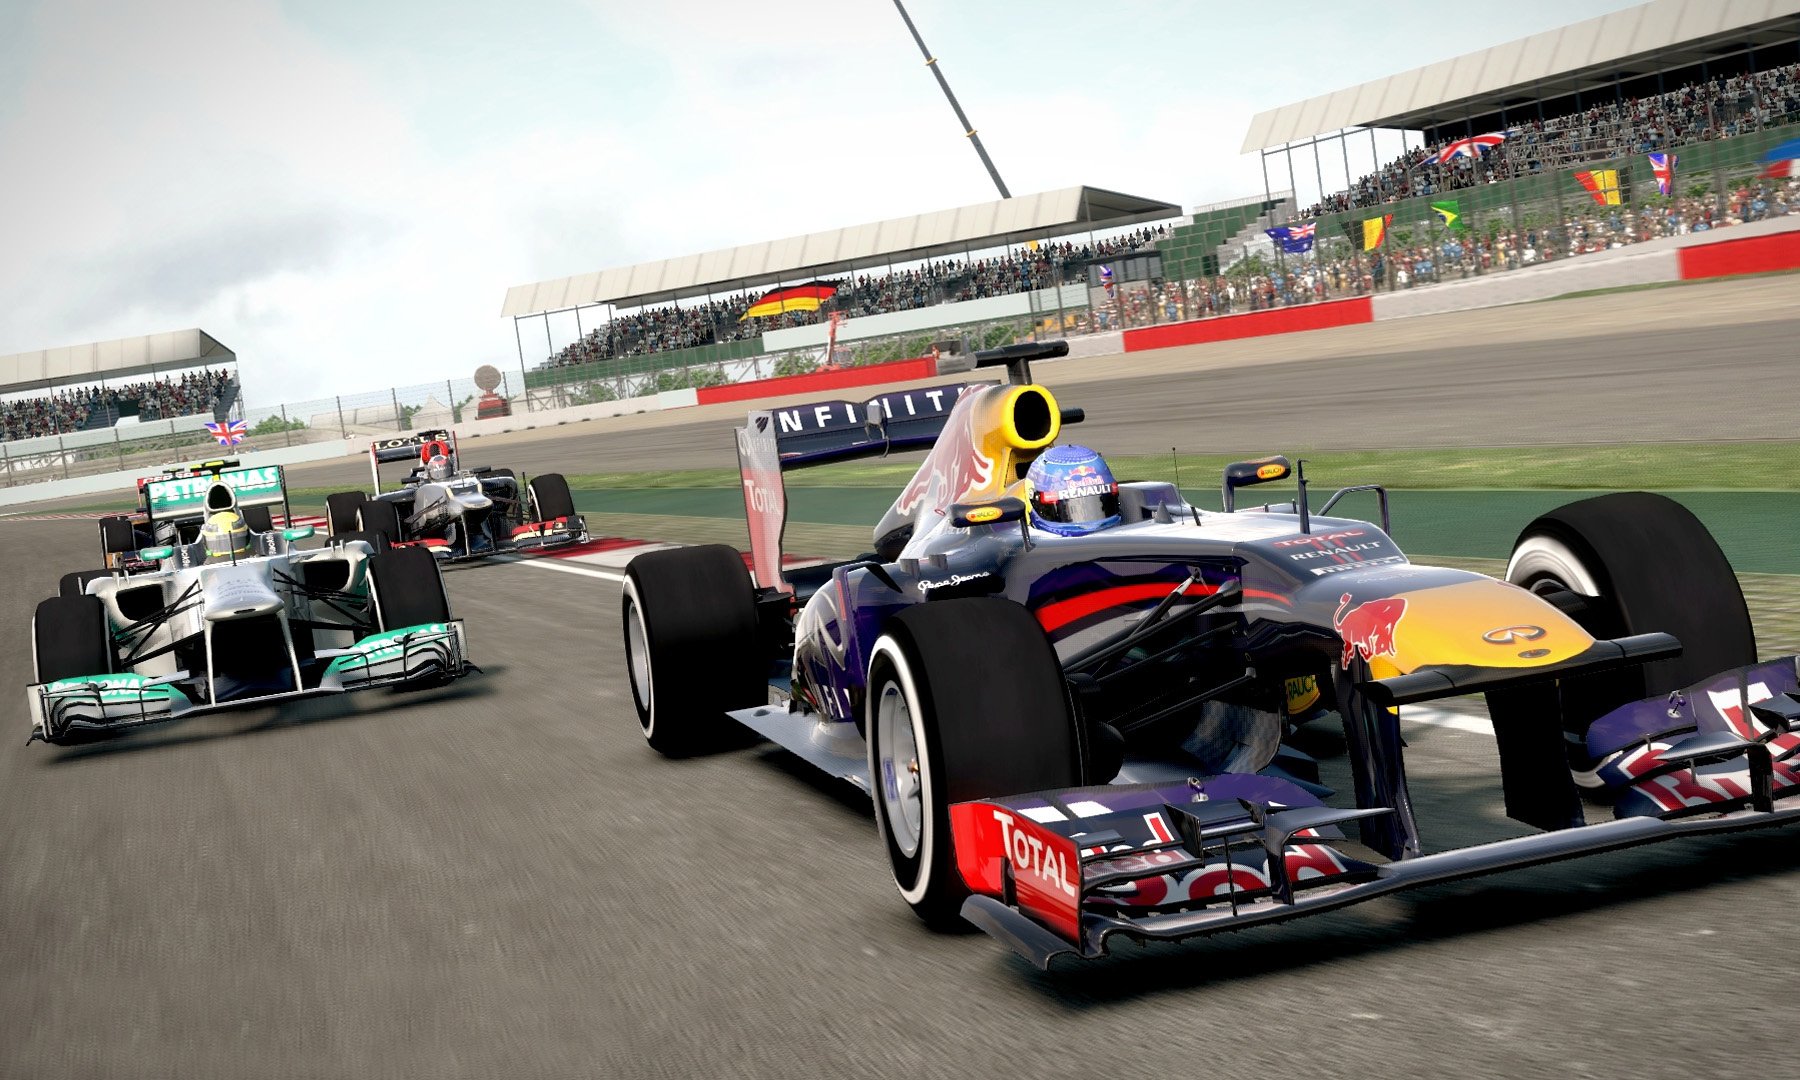 F1 2013 (PS3 / PlayStation 3) Game Profile | News, Reviews, Videos